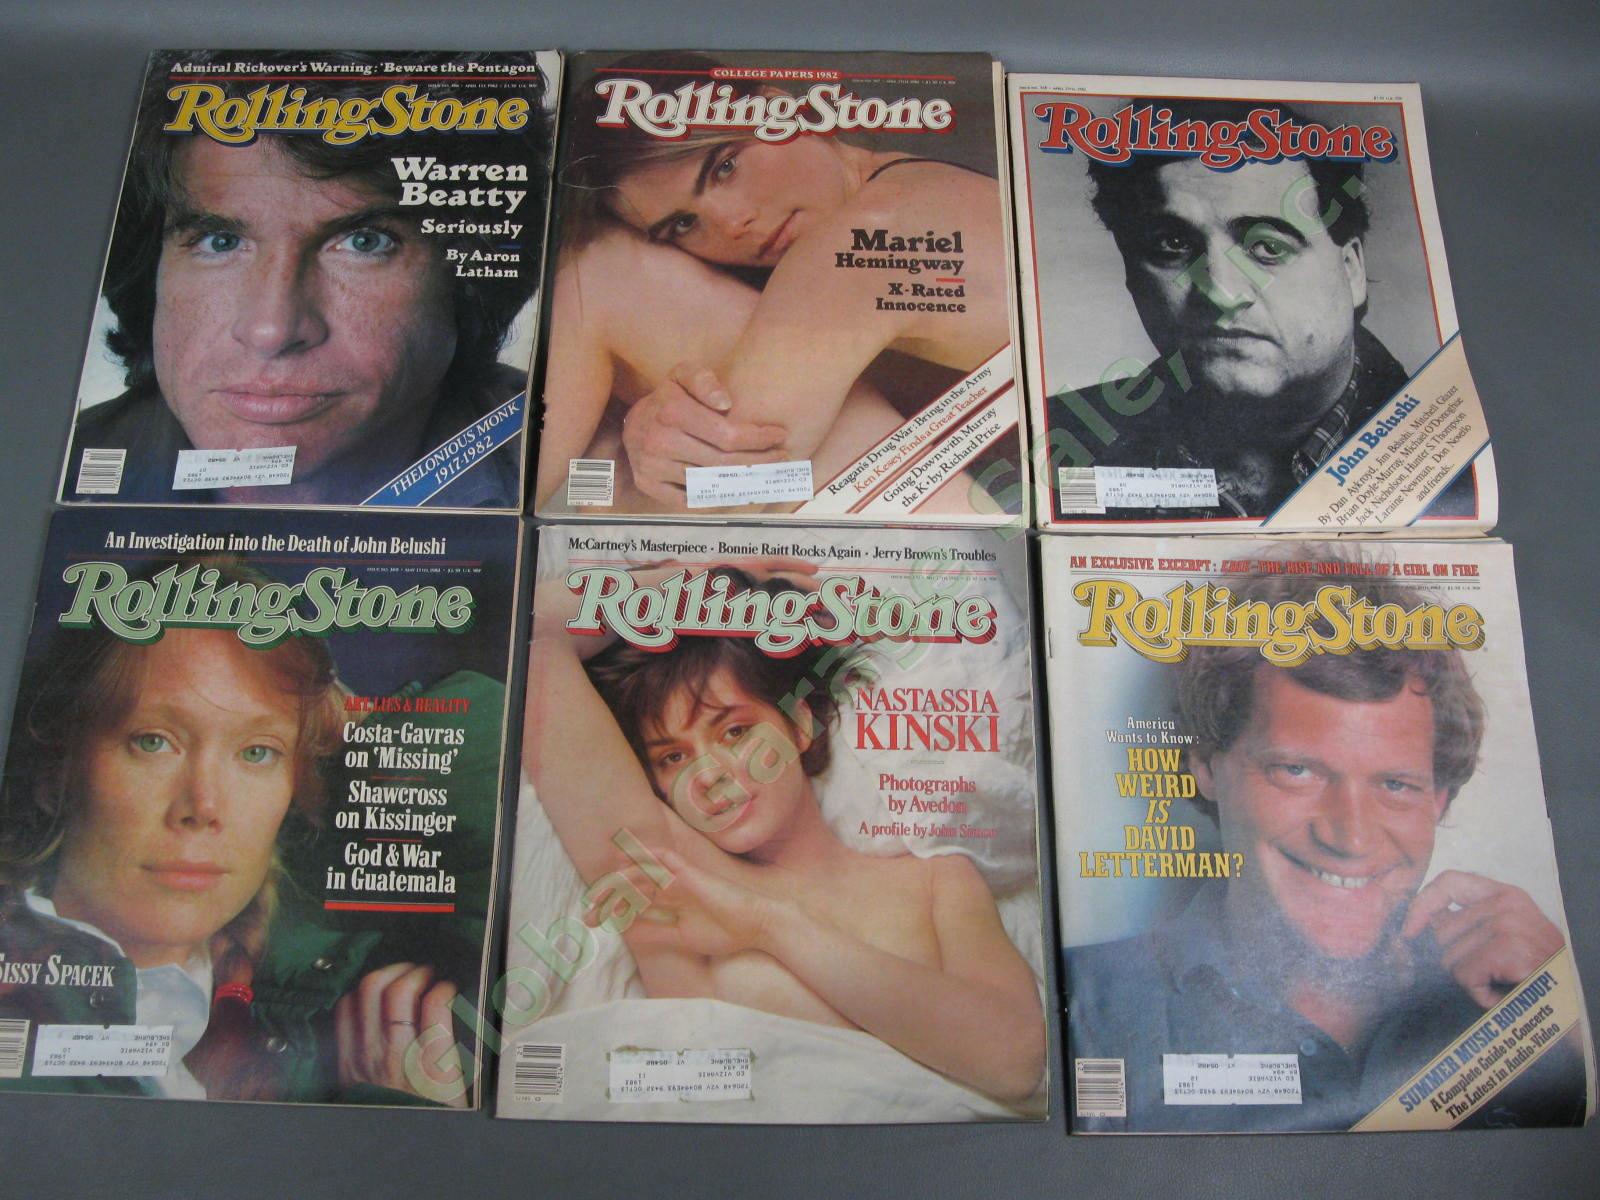 25 COMPLETE VINTAGE 1982 Rolling Stone Magazine Collection Set LOT Full Year Run 1